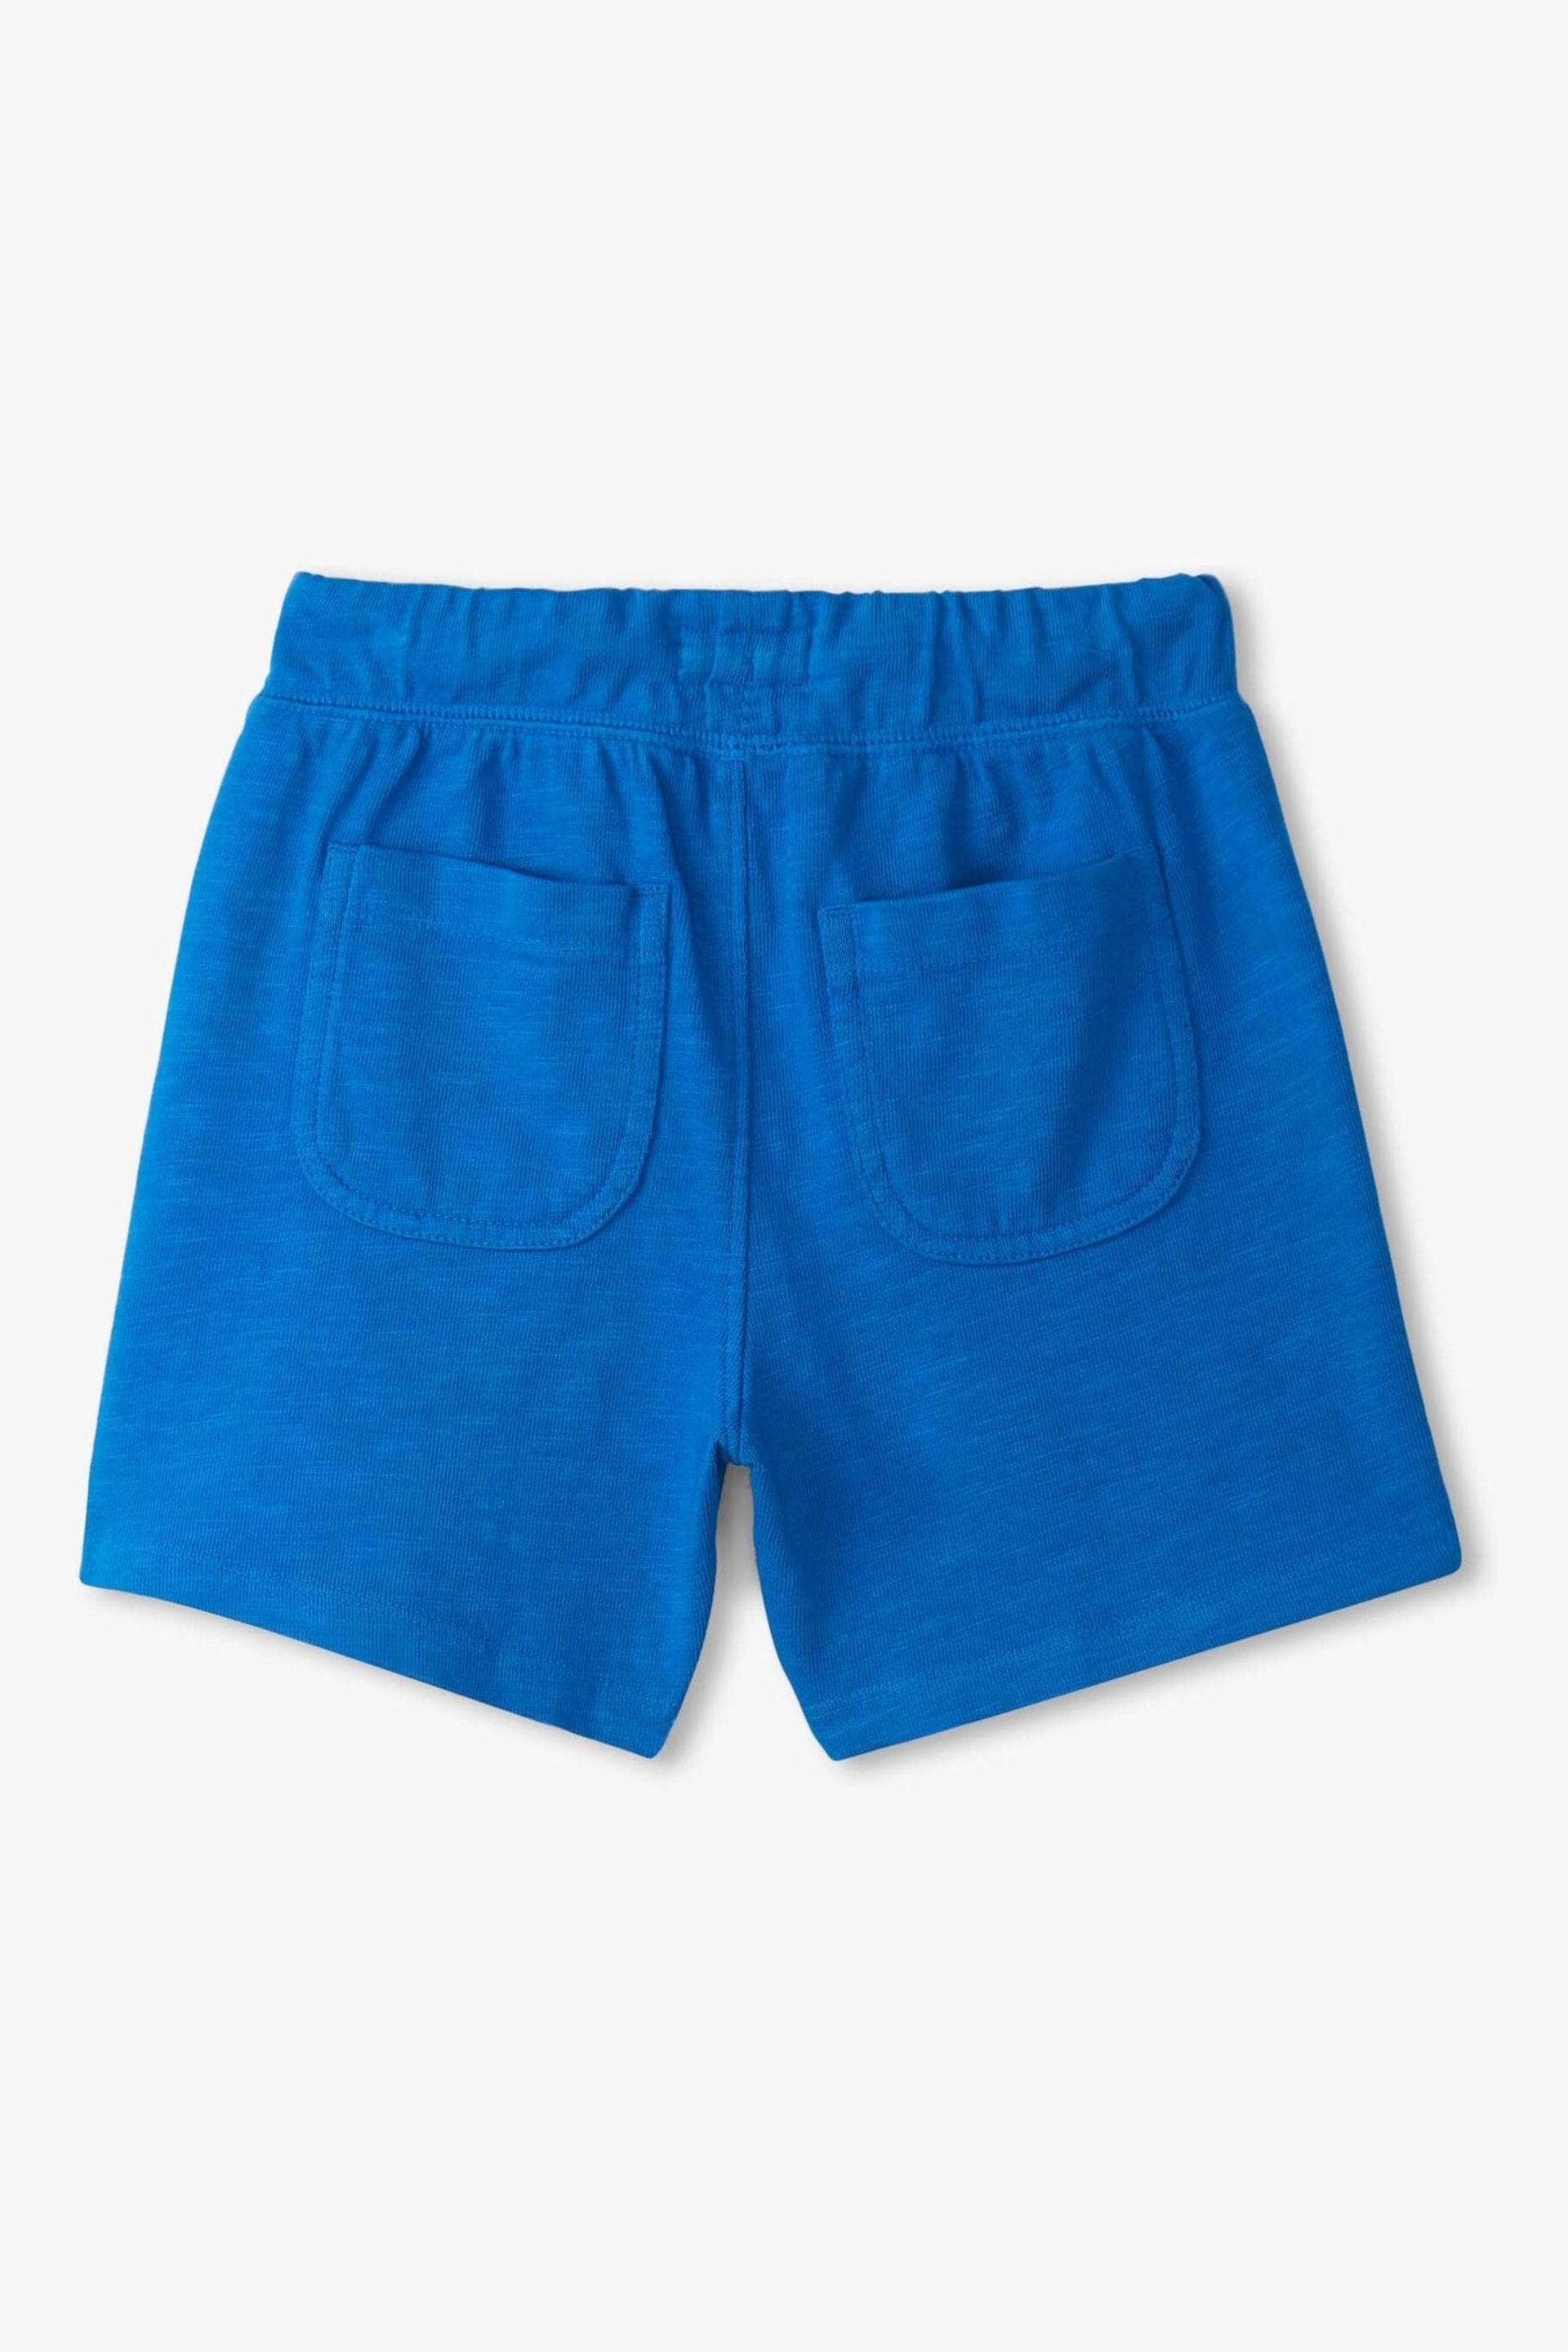 Hatley Jersey Relaxed Shorts - Image 2 of 6